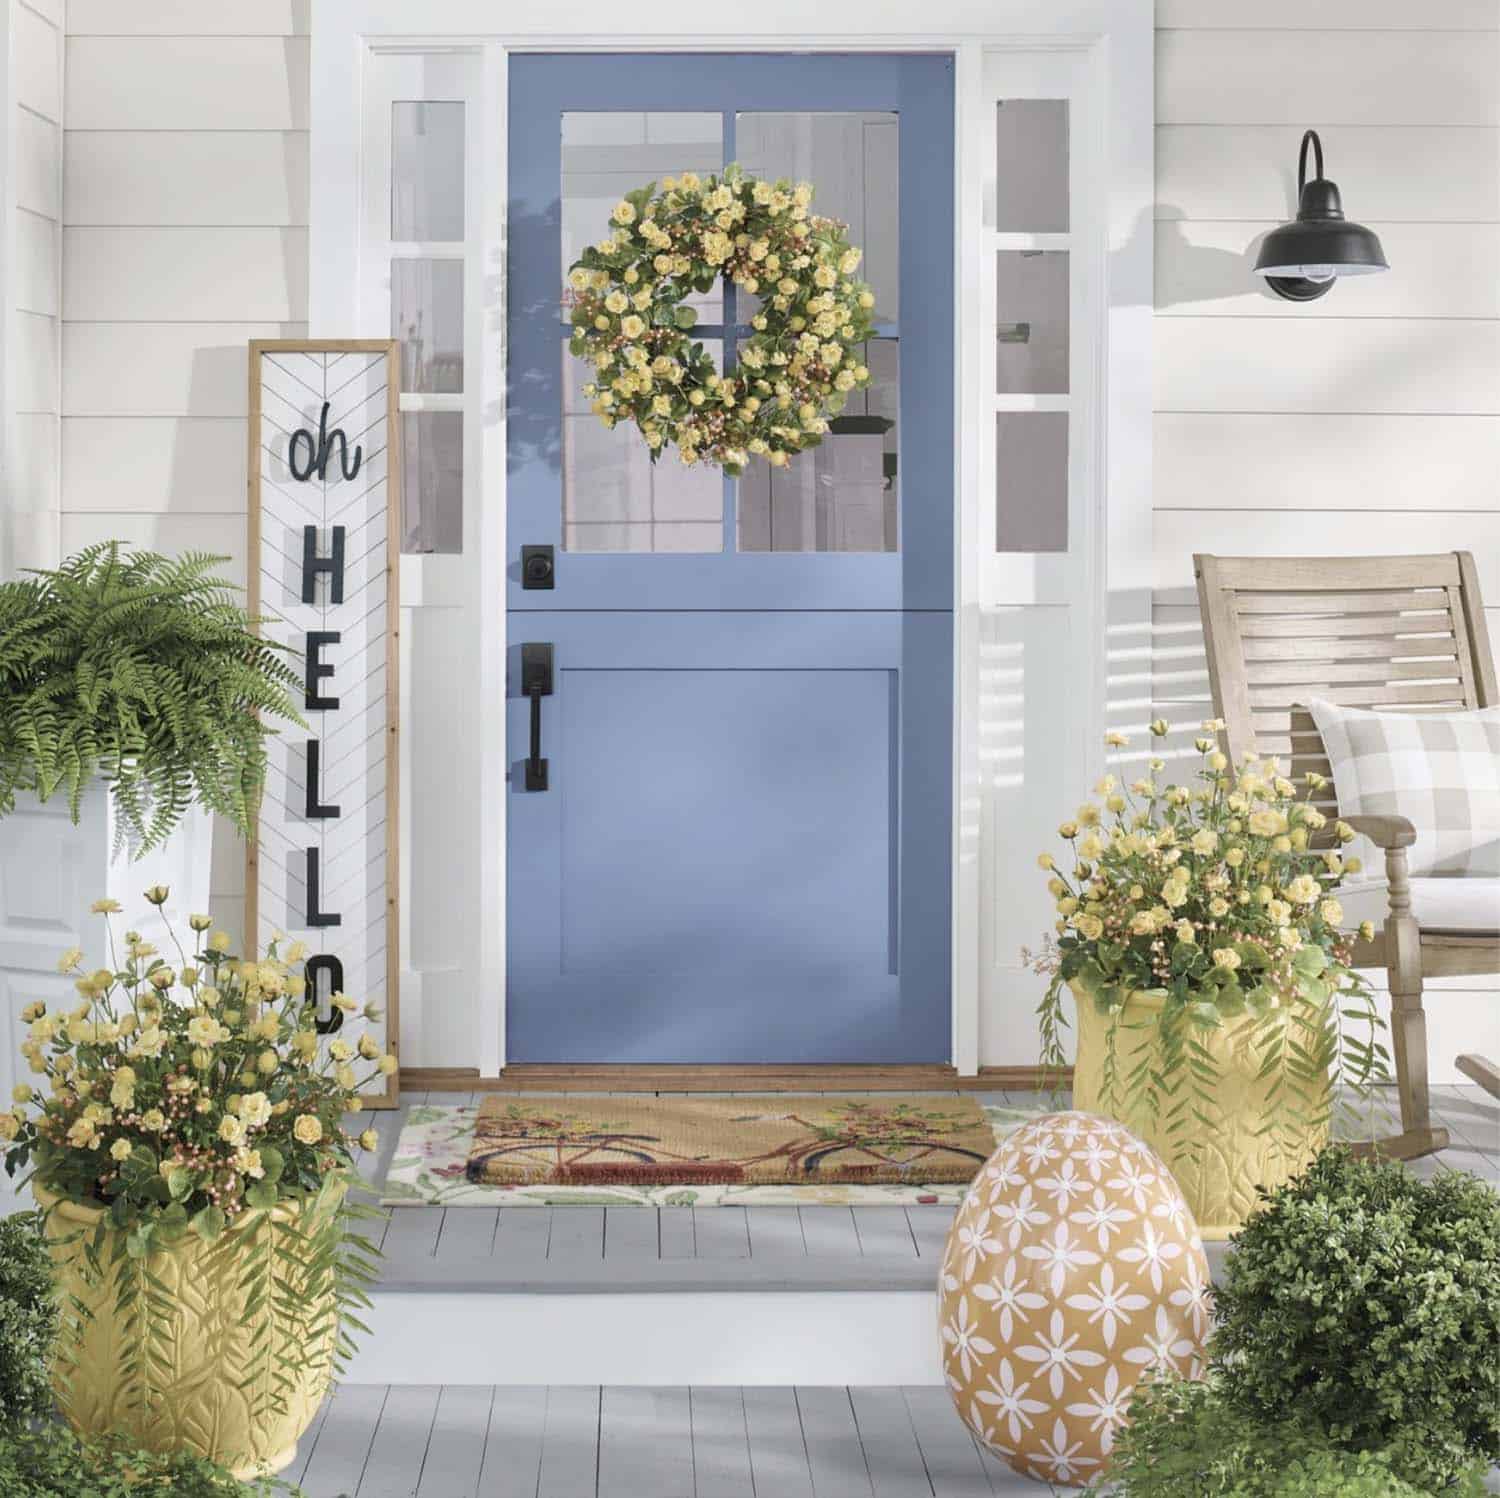 spring front porch decor with a sign, door wreath and potted plants